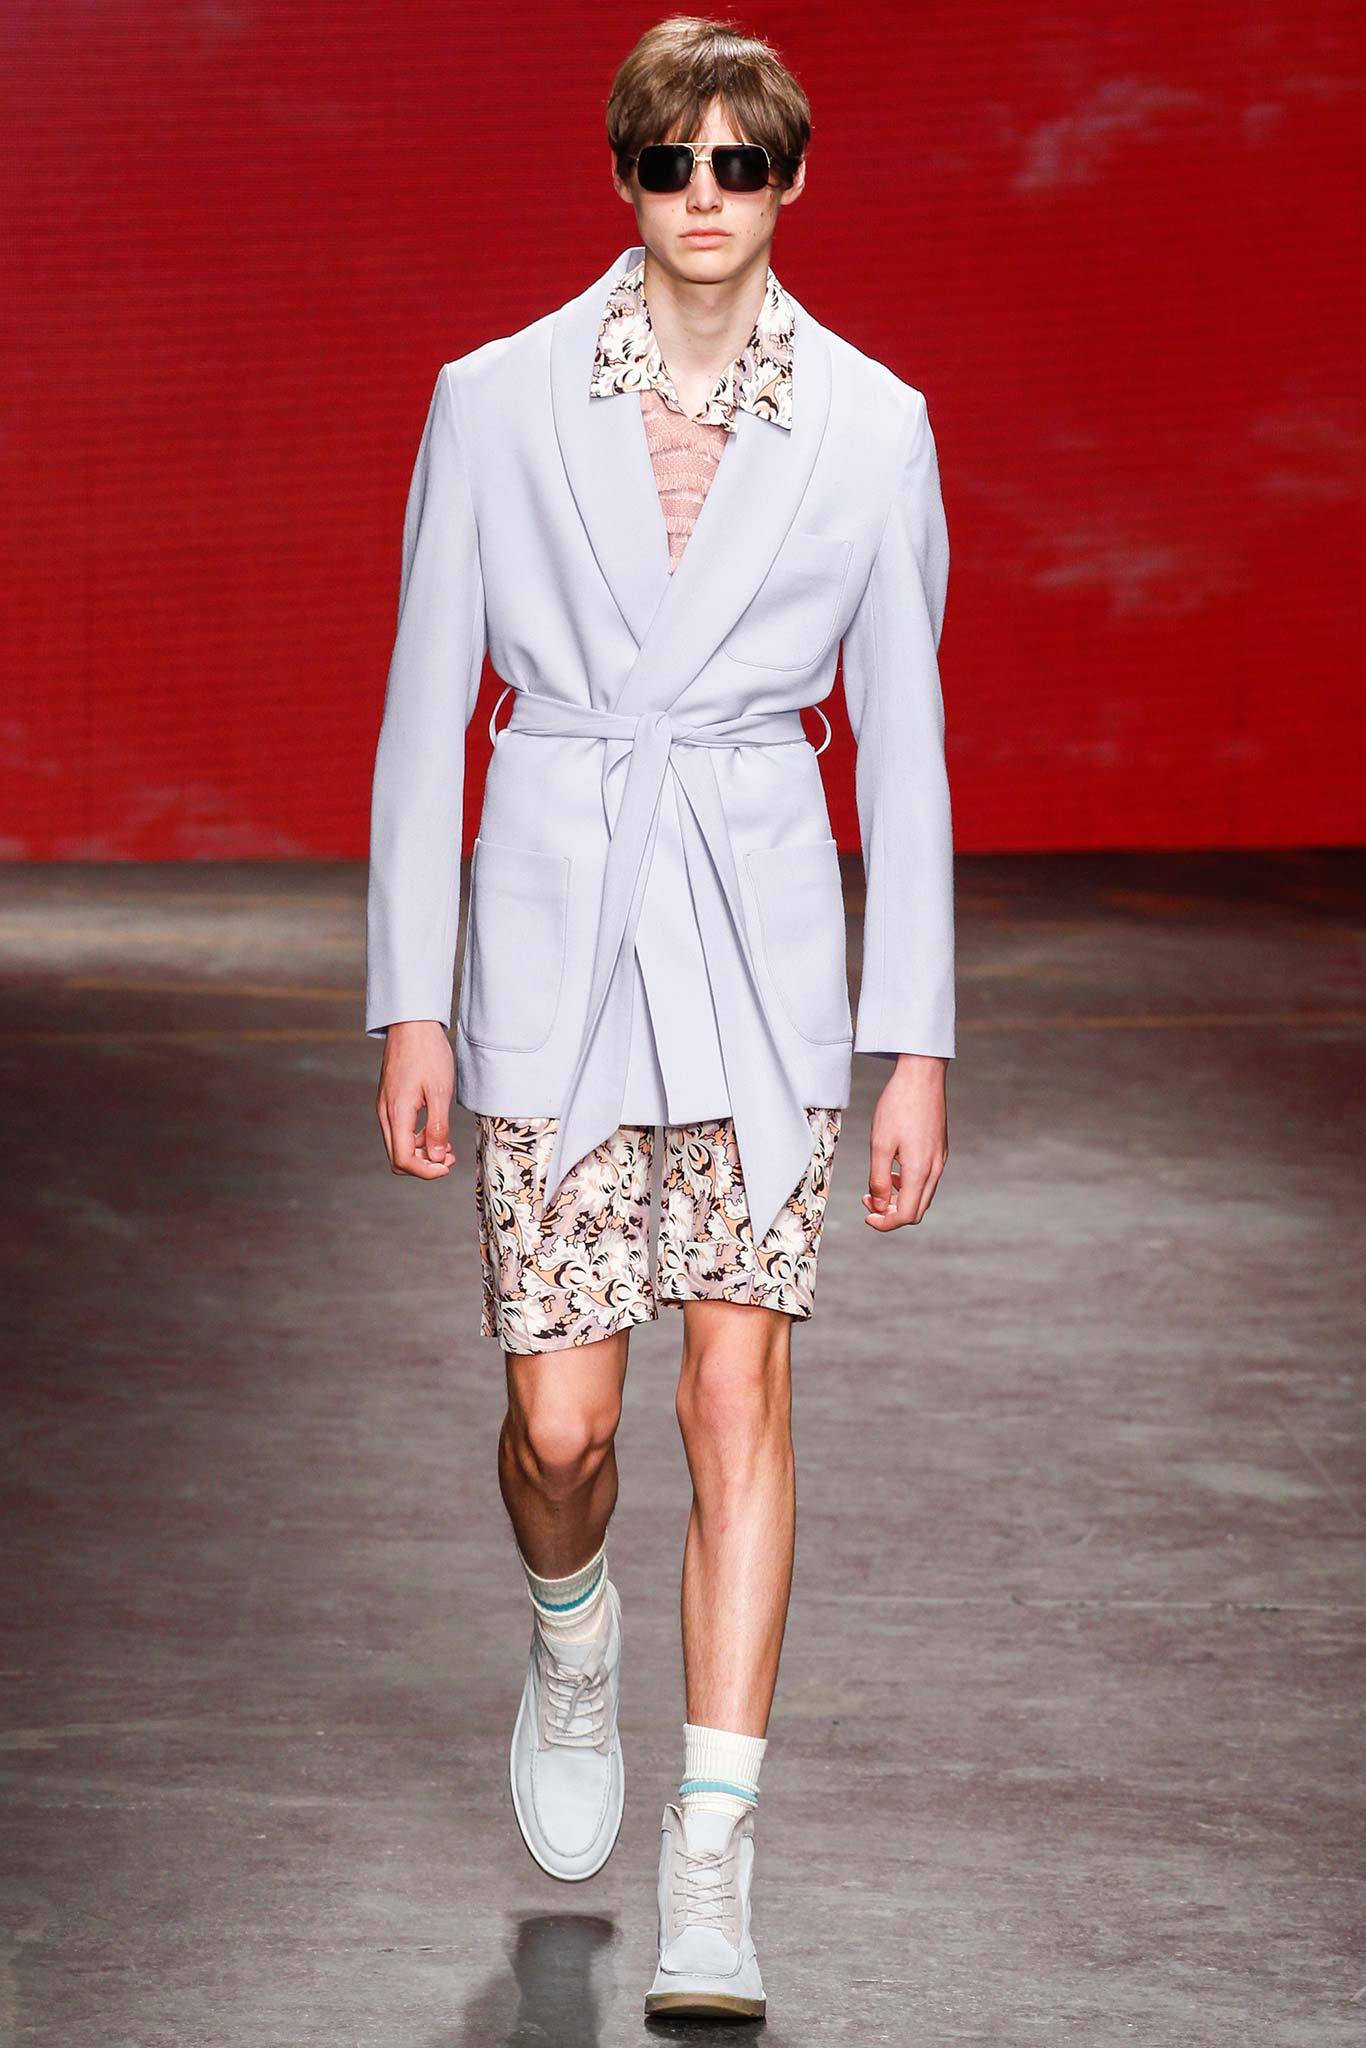 Topman Design 2015 Spring Summer London Collections